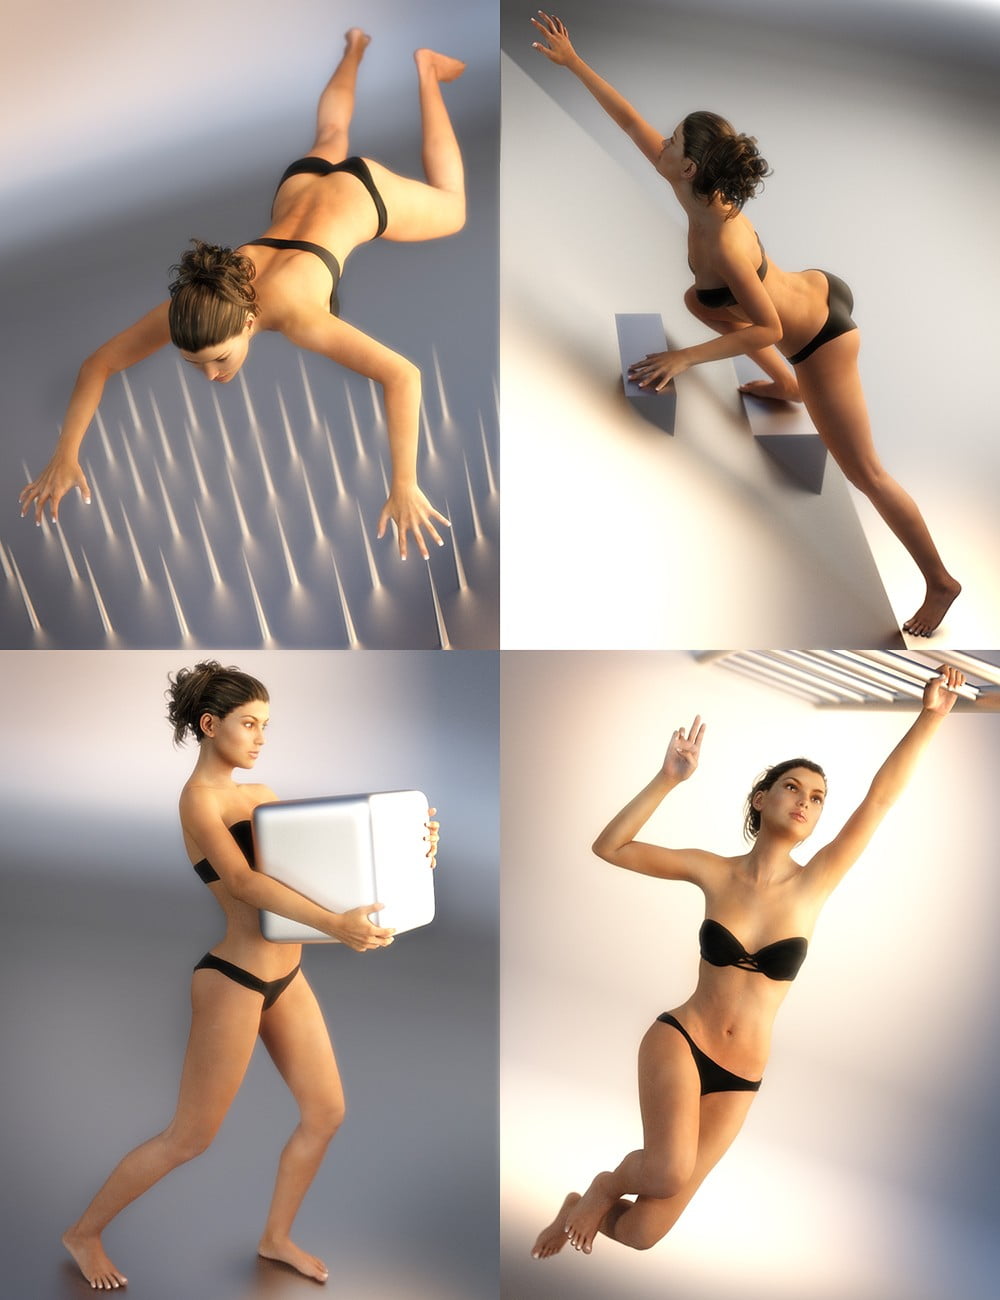 04-daz3d_pitfall-poses-for-victoria-7